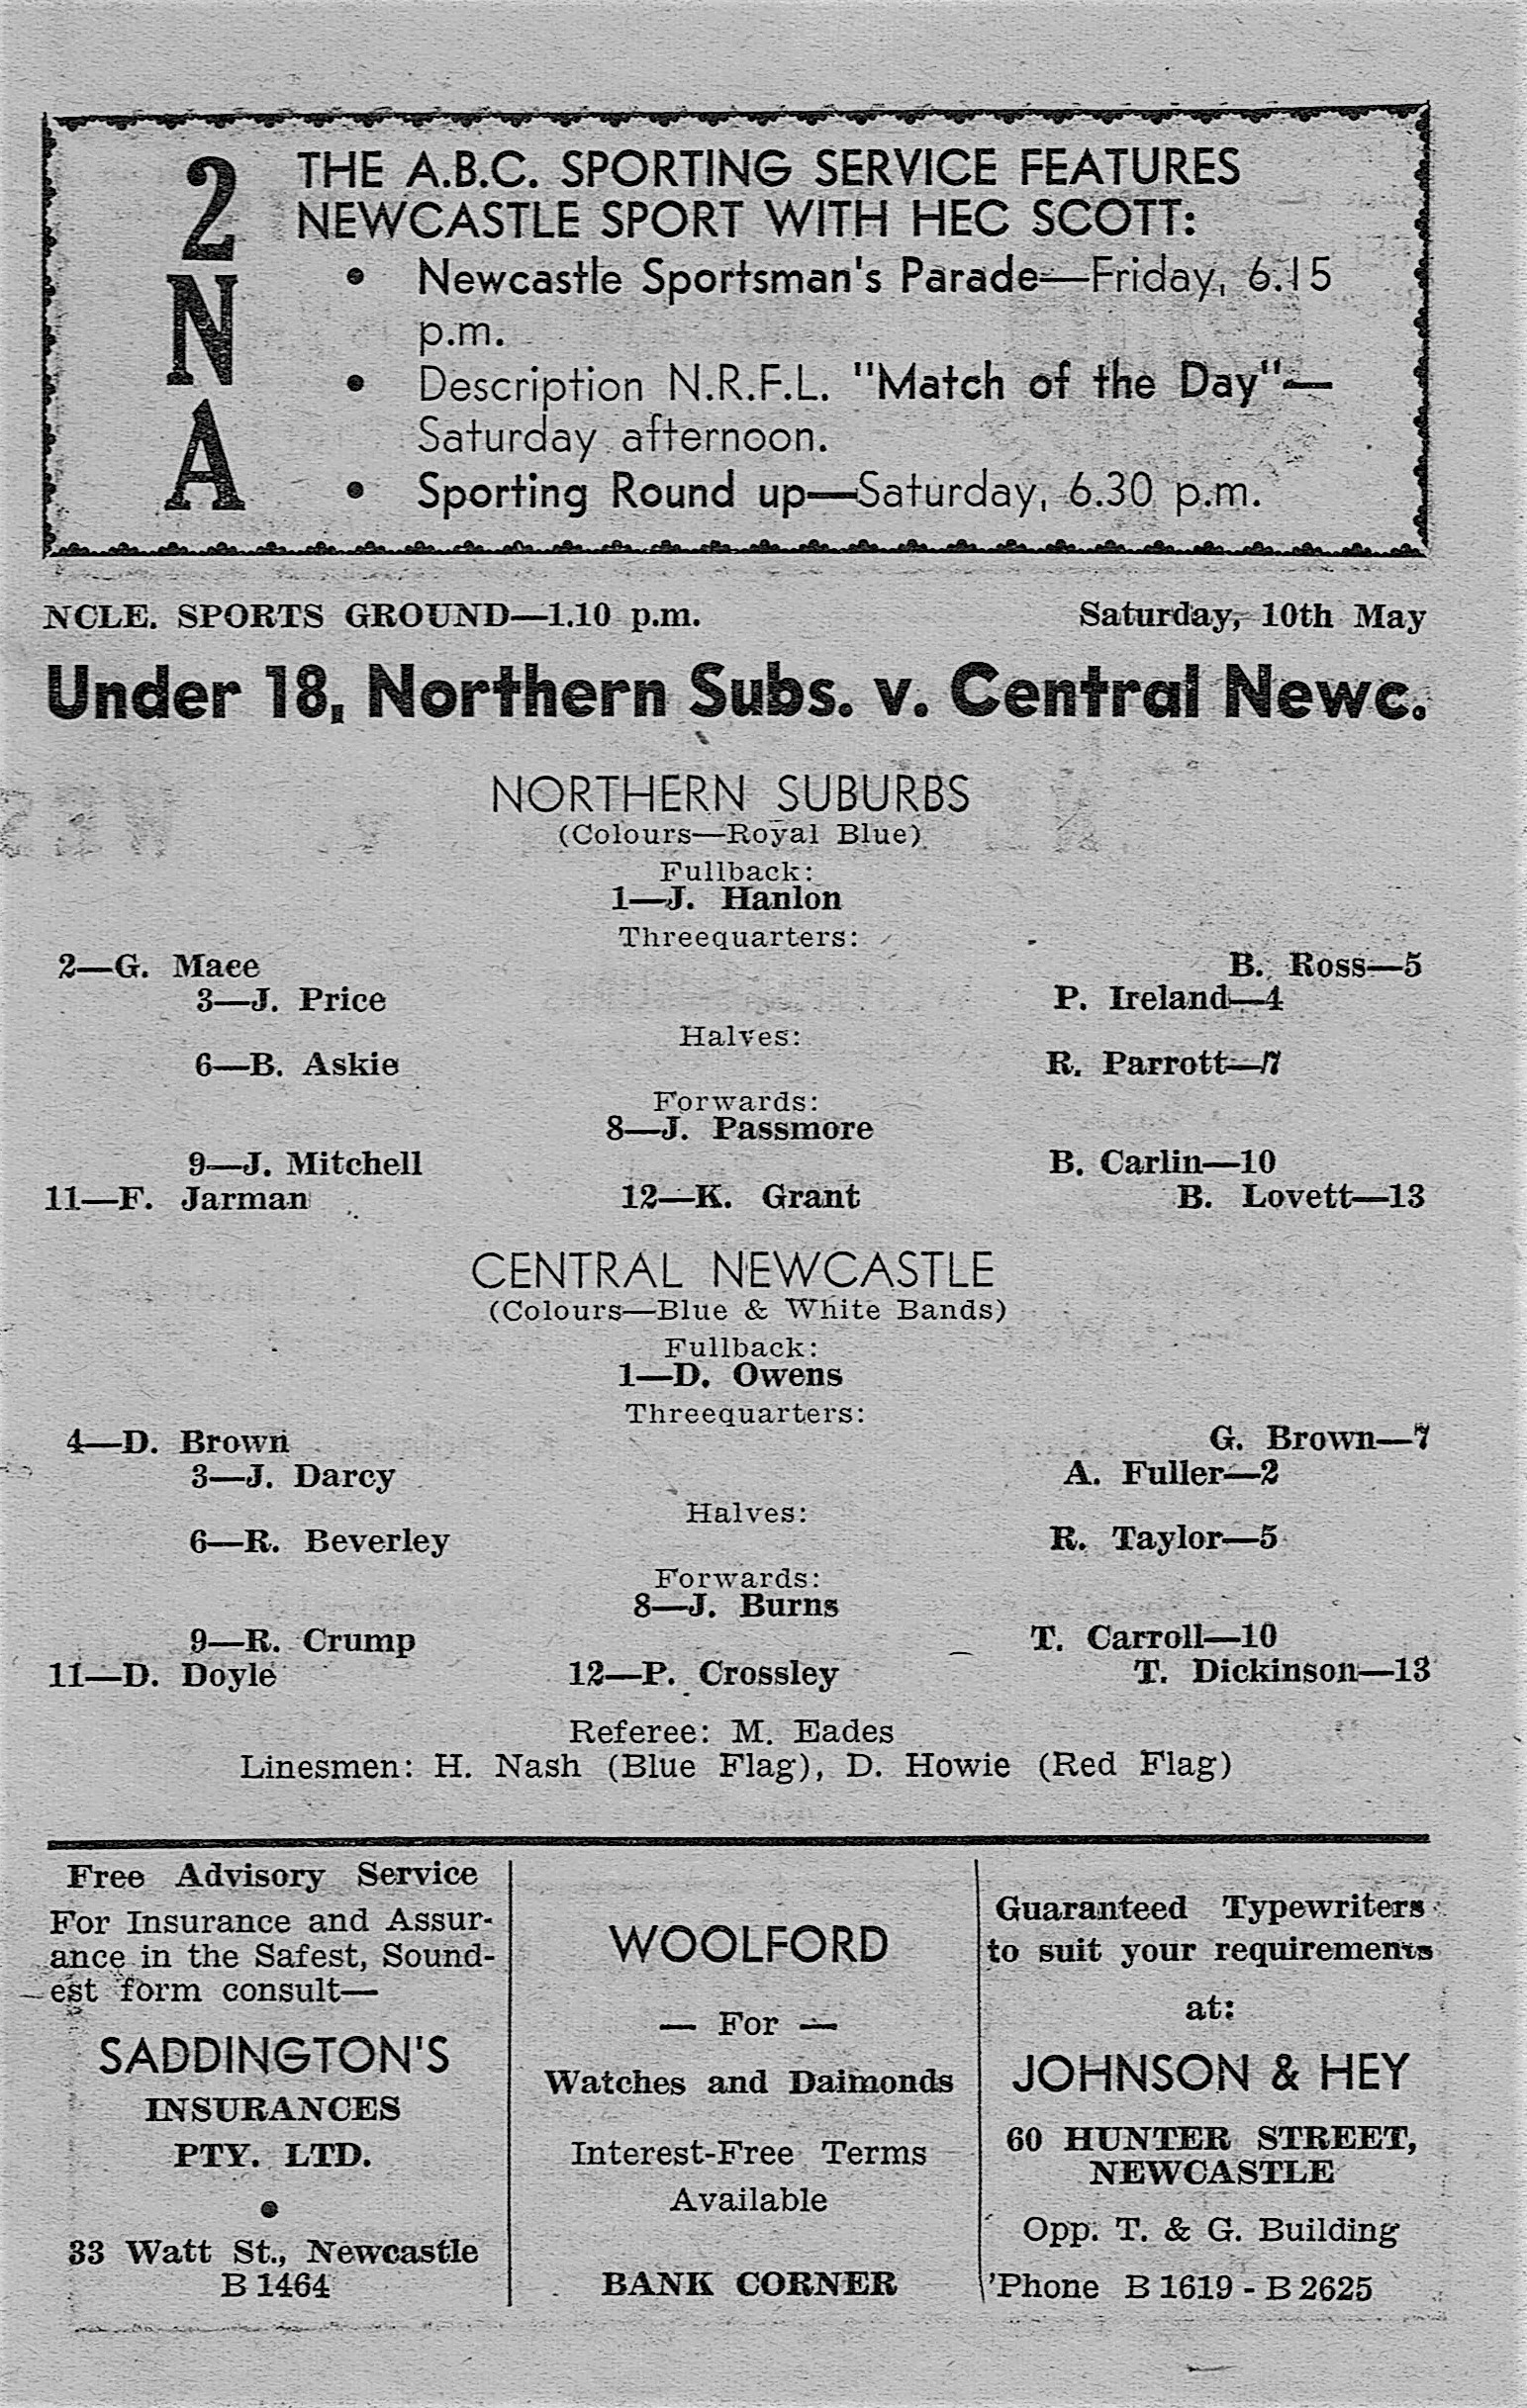 Norths-vs-Central-Under-18s 1958.